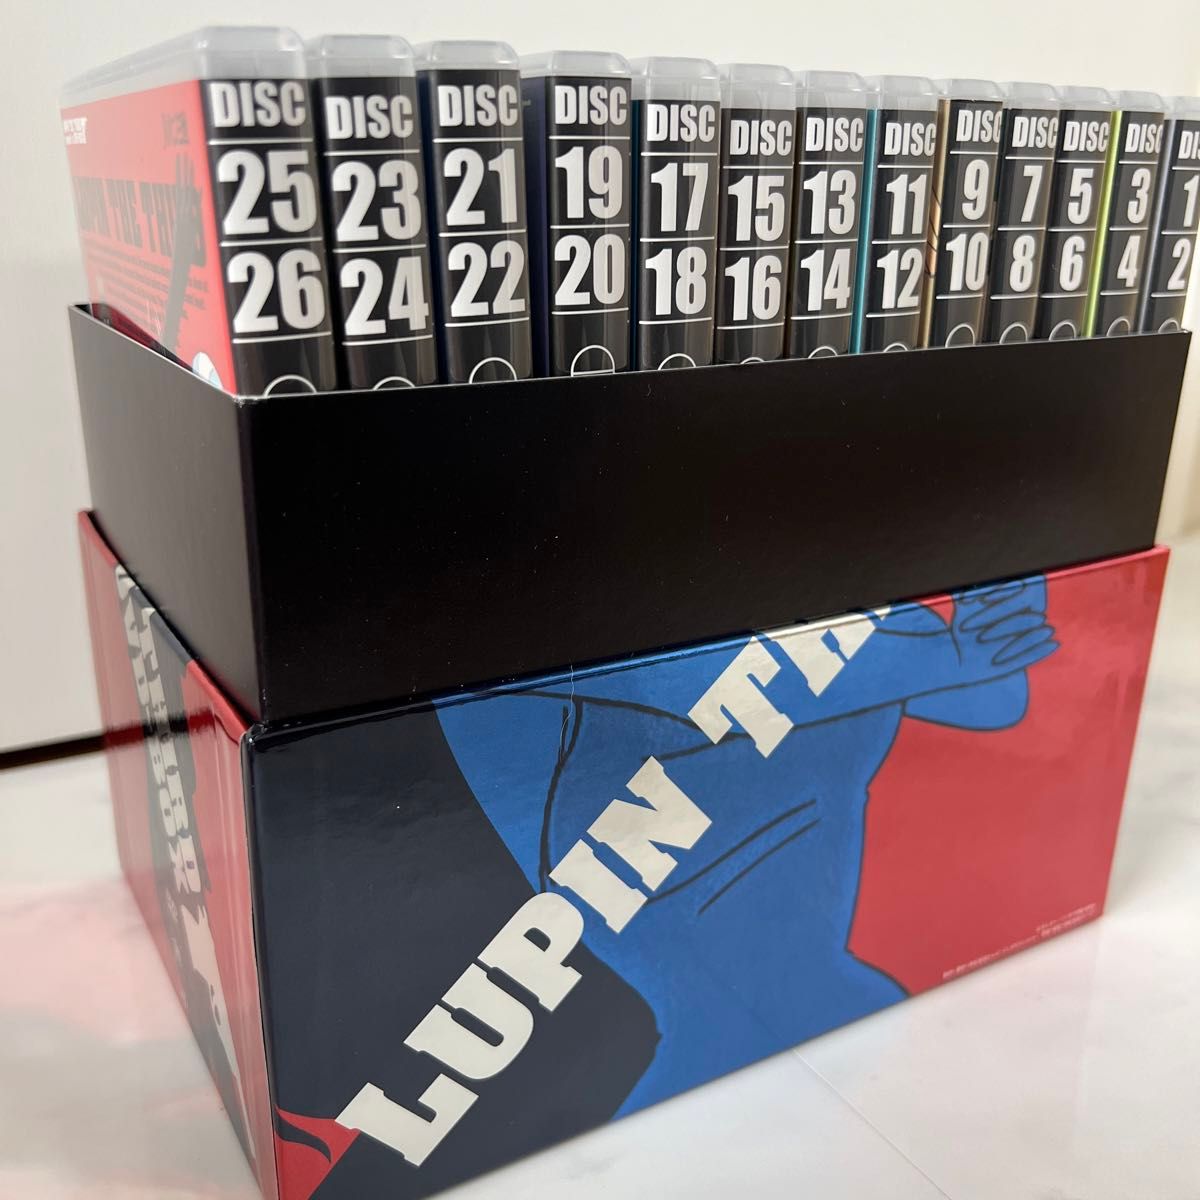 LUPIN THE THIRD second tv. DVD-BOX　ルパン三世